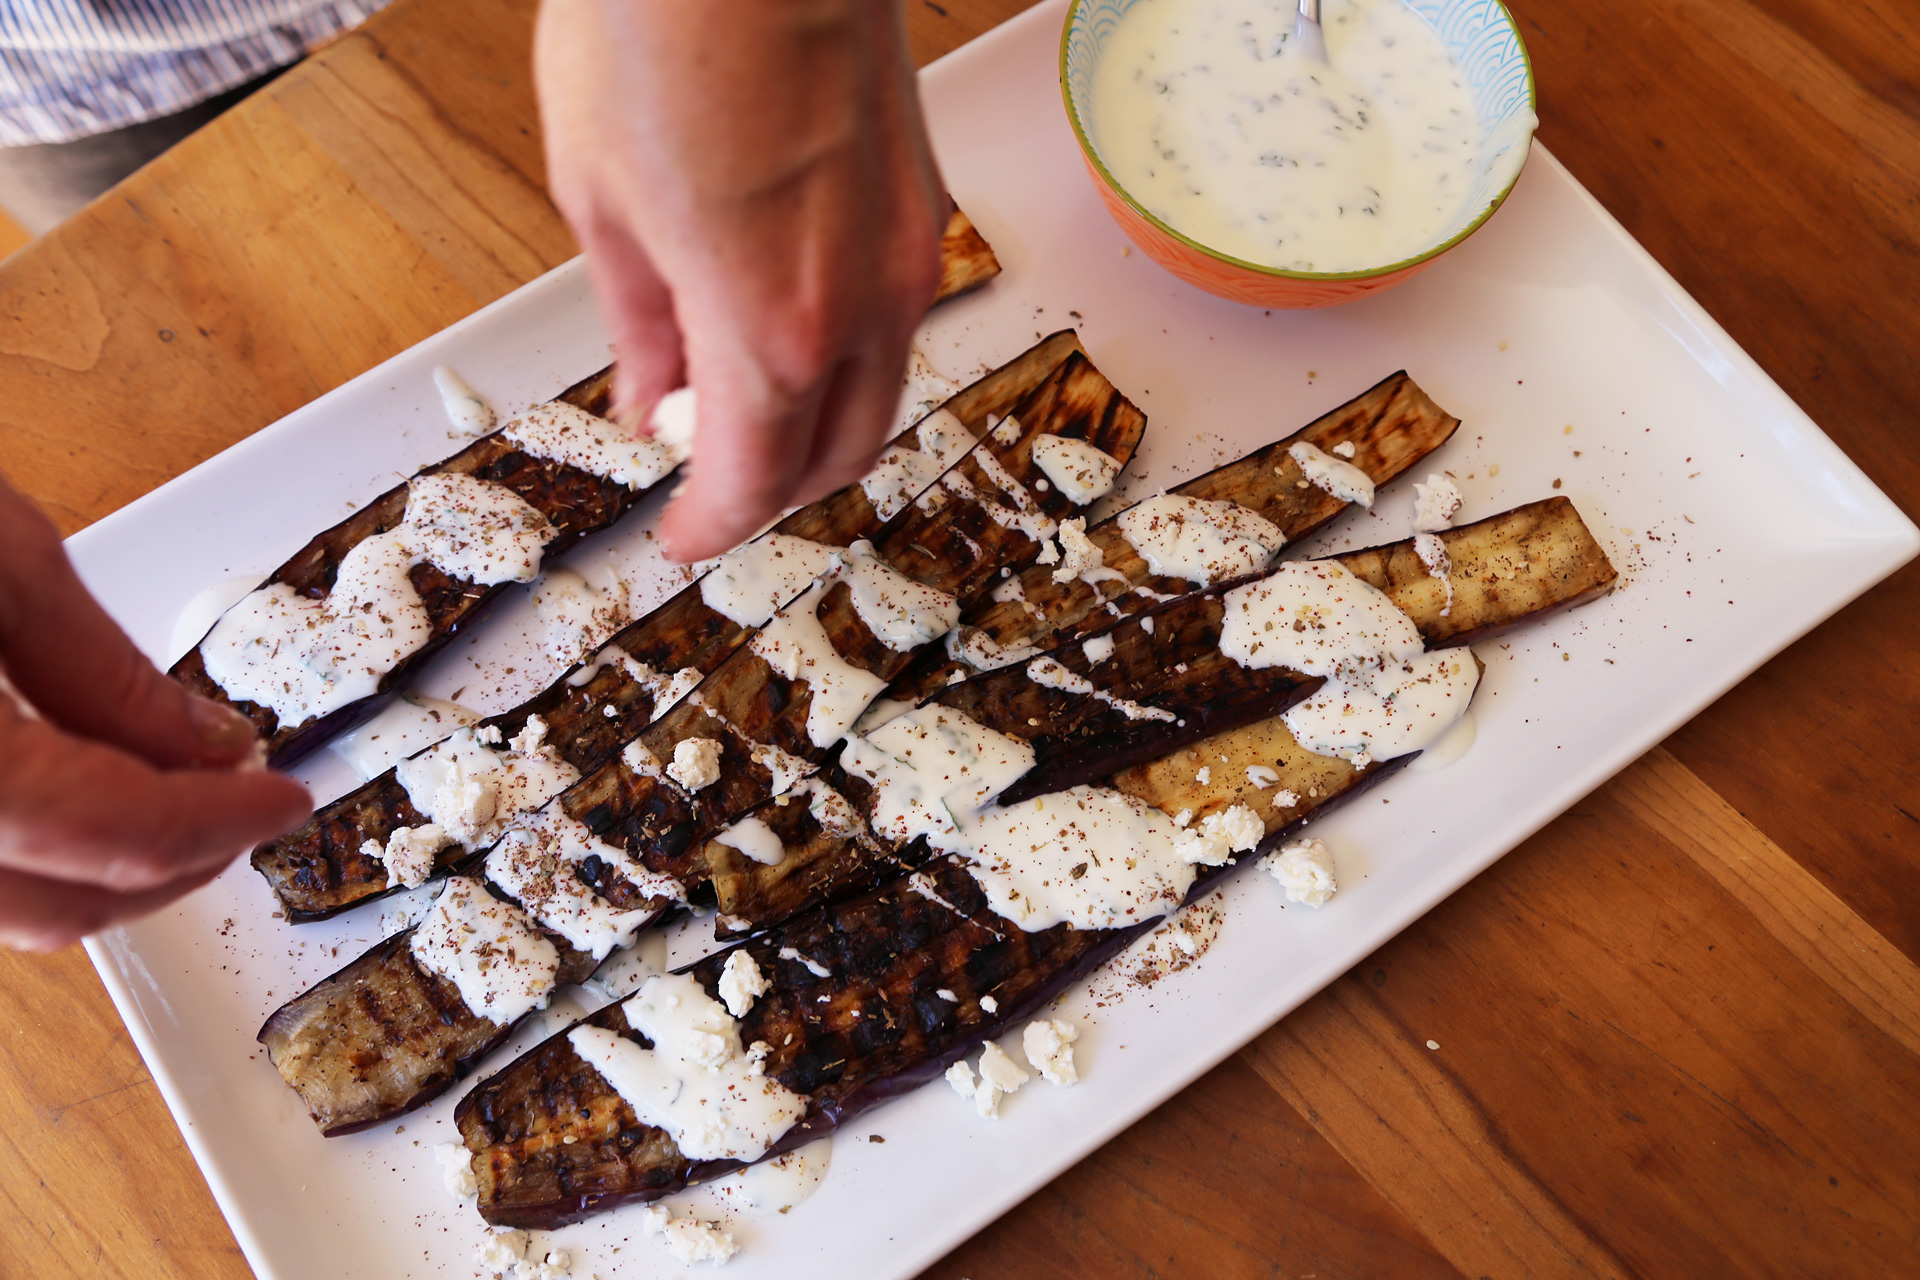 Transfer to a serving plate. Drizzle the eggplant with the yogurt sauce, then sprinkle with the feta and za’atar. Serve.